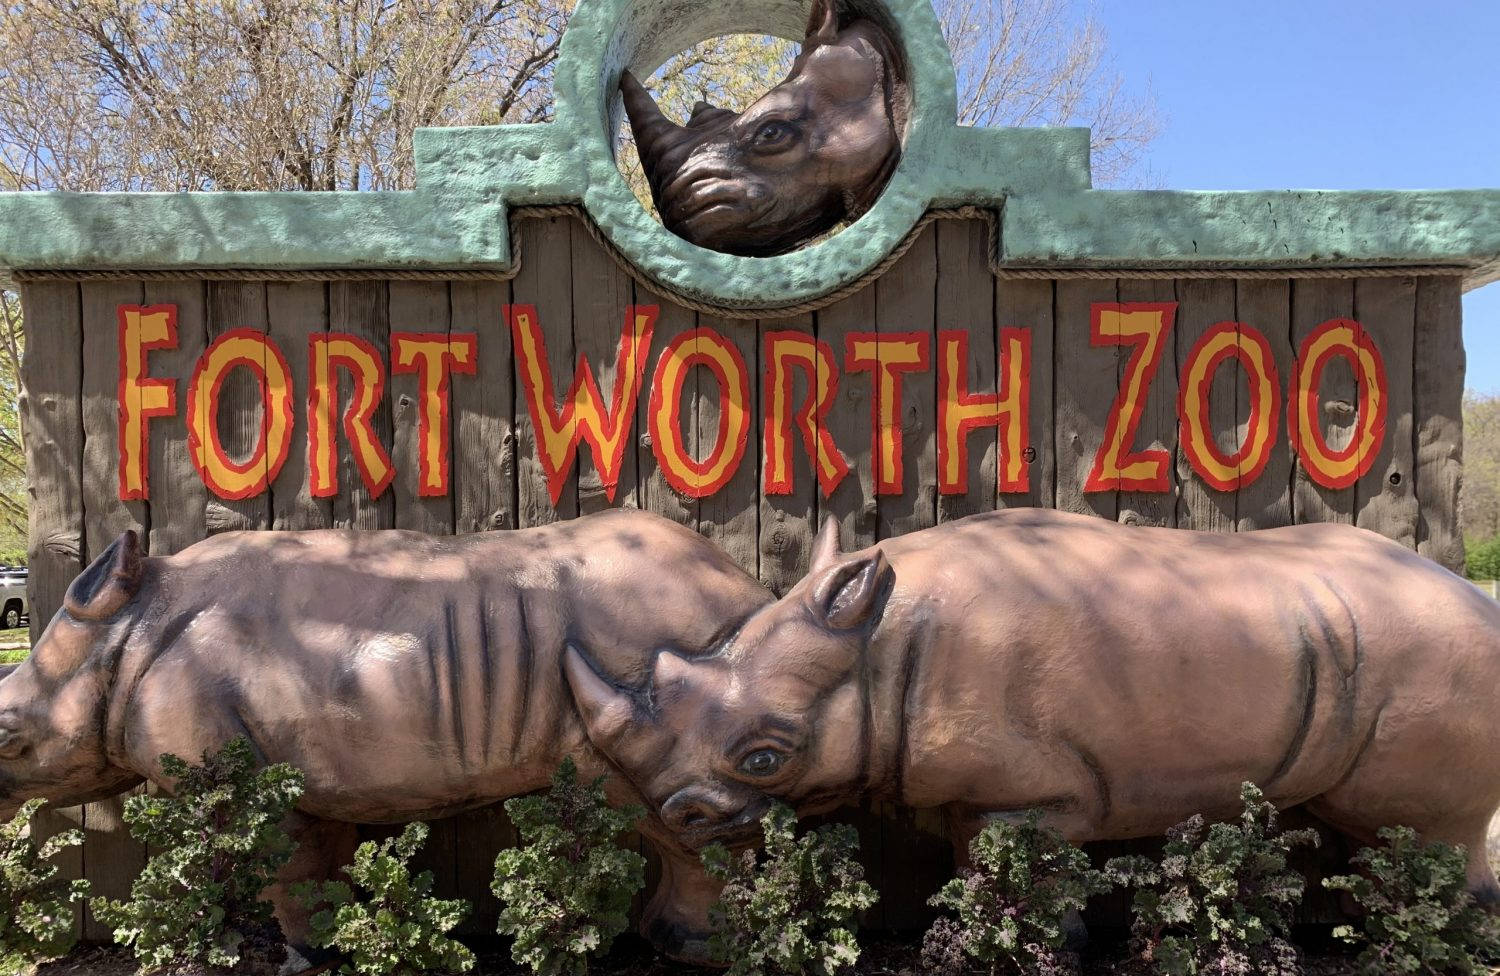 A Captivating View of the Fort Worth Zoo's Wilder Vision Project Wallpaper